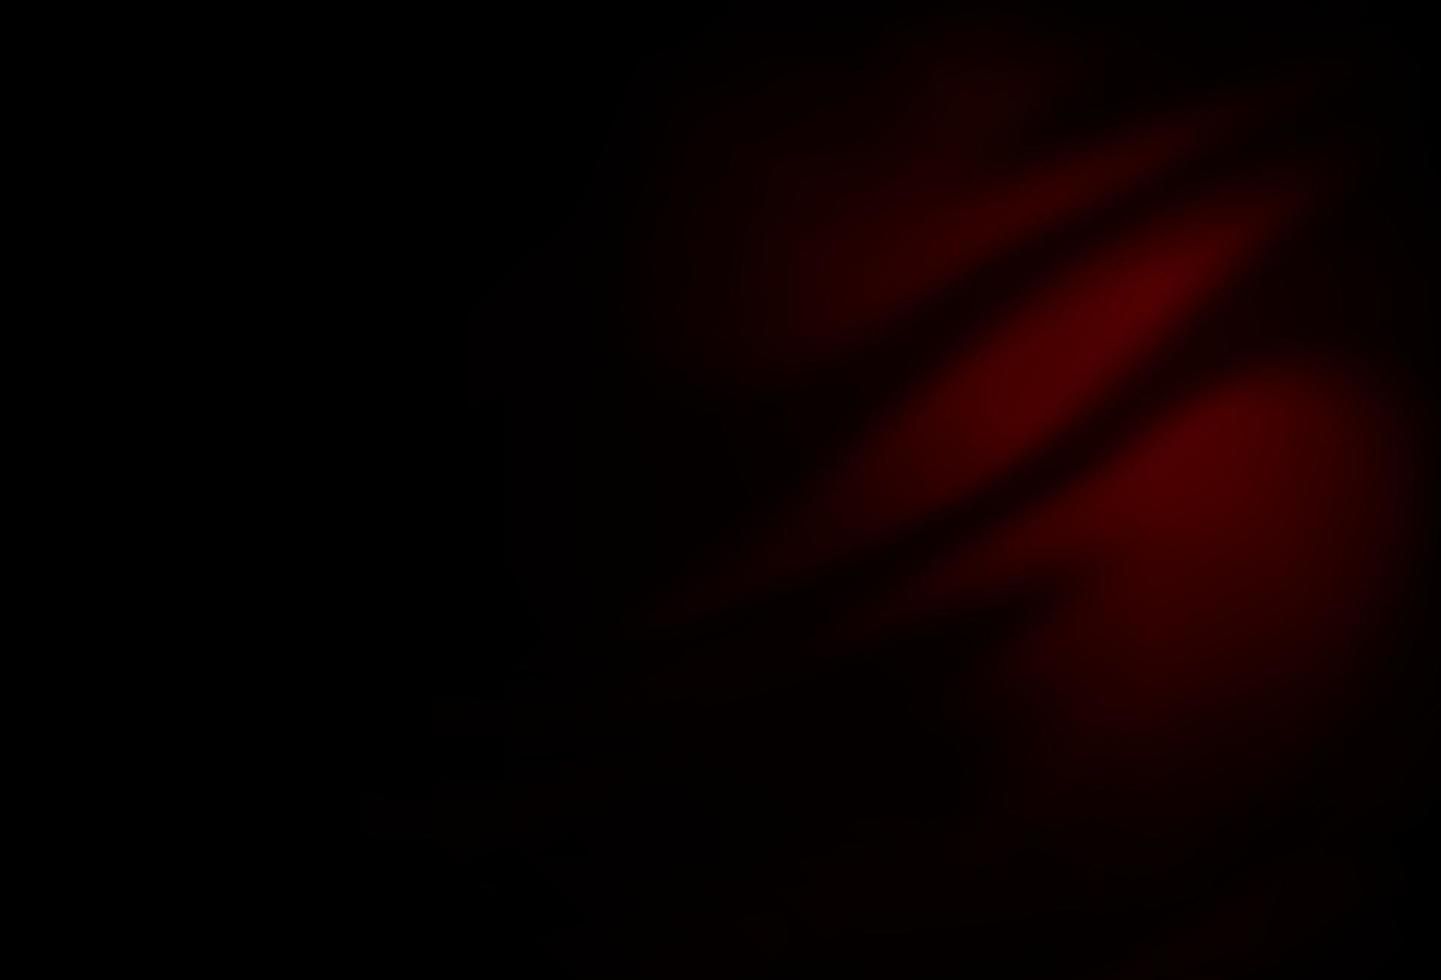 Dark Red vector glossy abstract background.